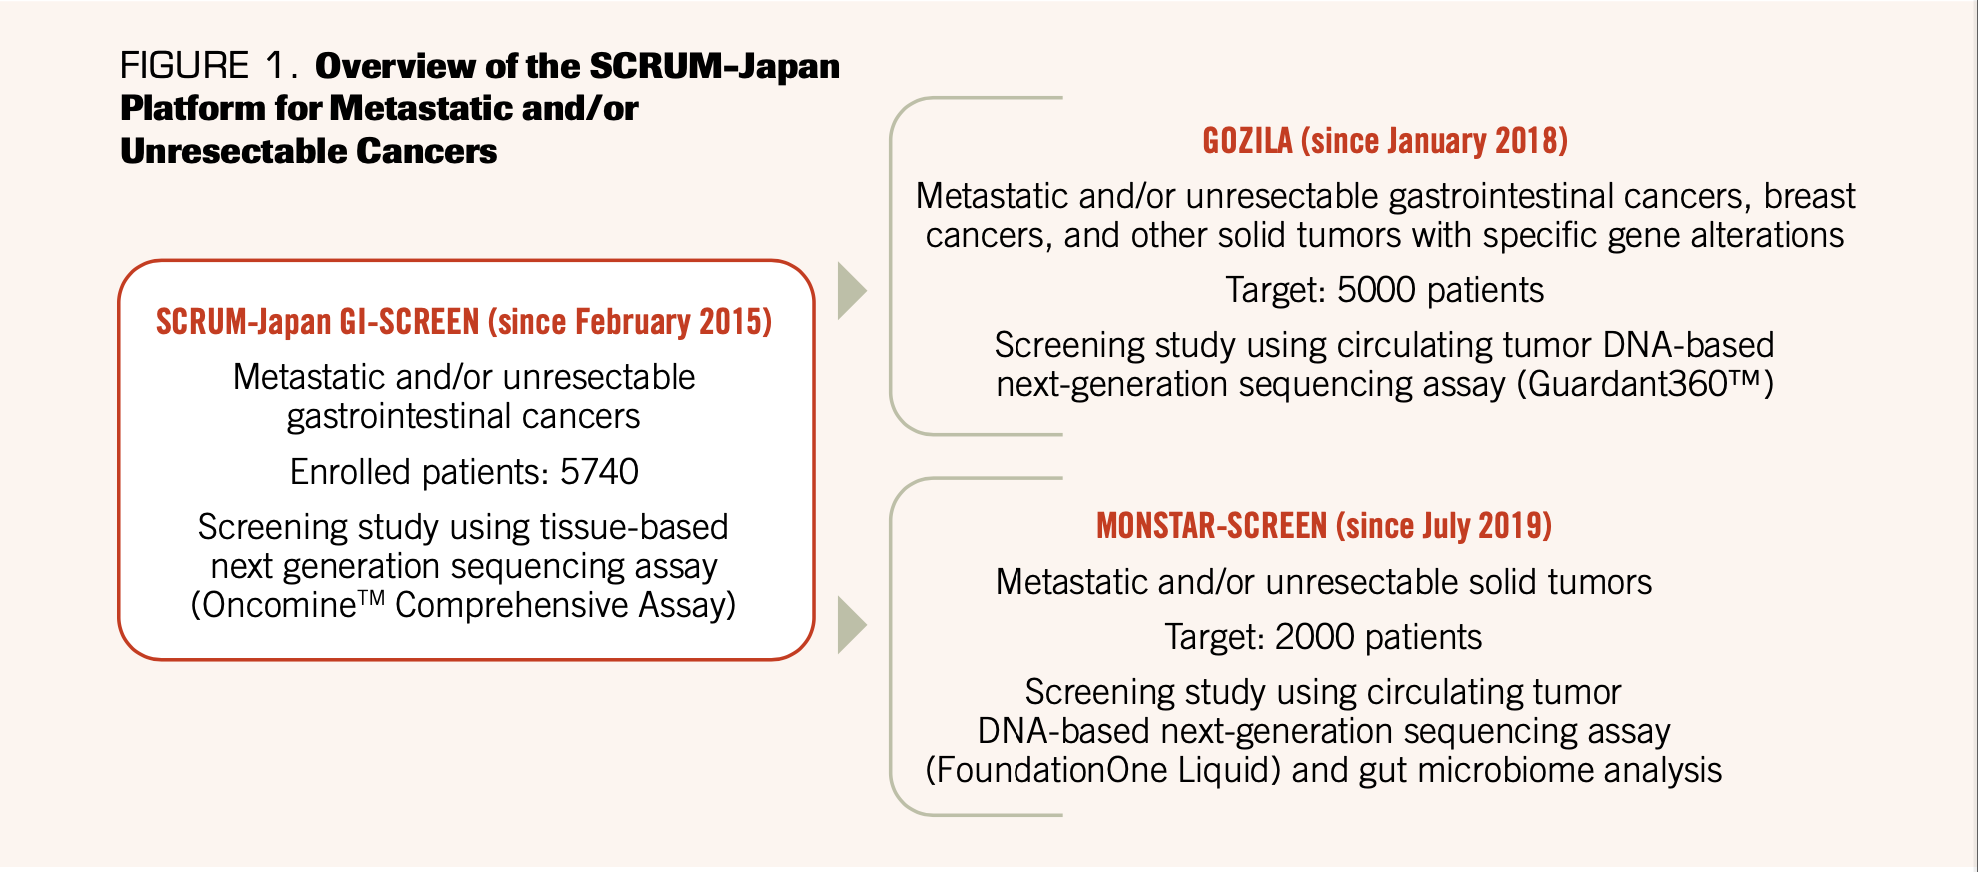 FIGURE 1. Overview of the SCRUM-Japan Platform for Metastatic and/or Unresectable Cancers